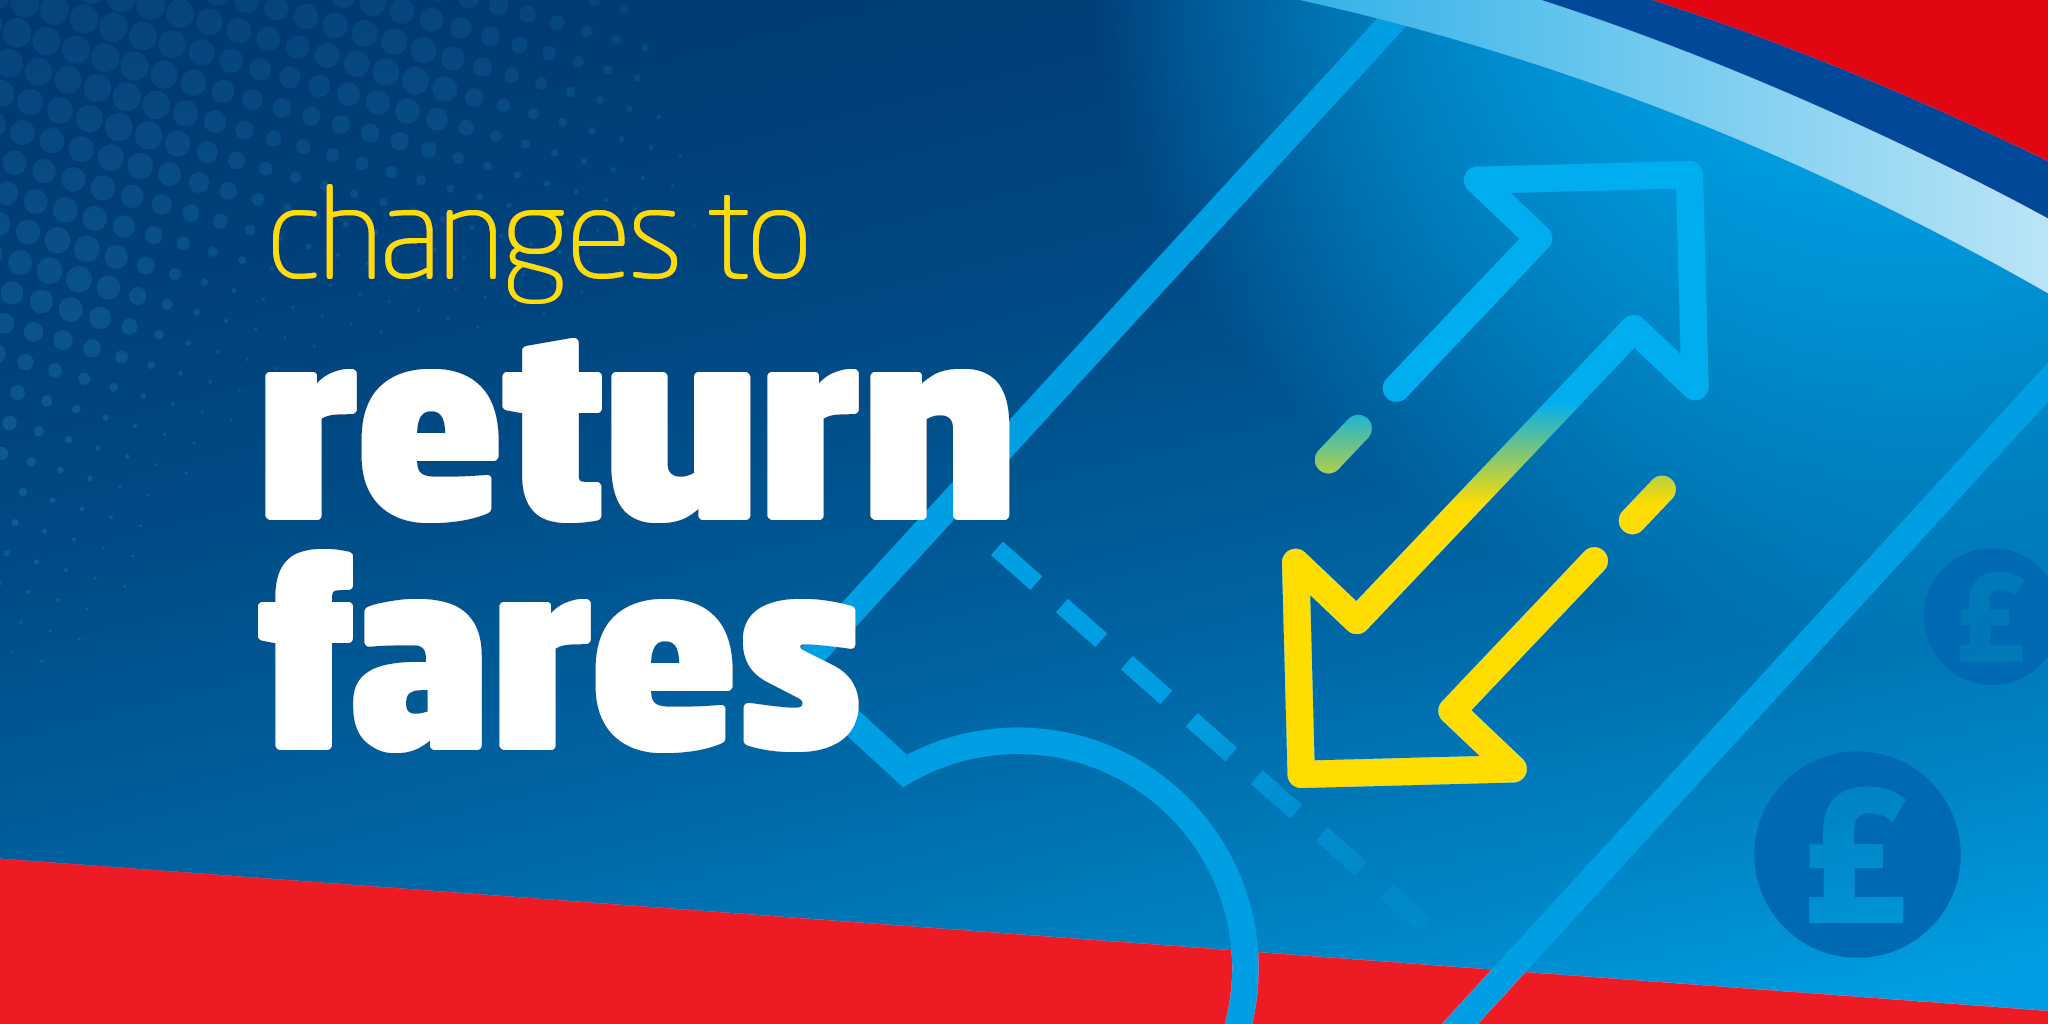 changes to return fares image